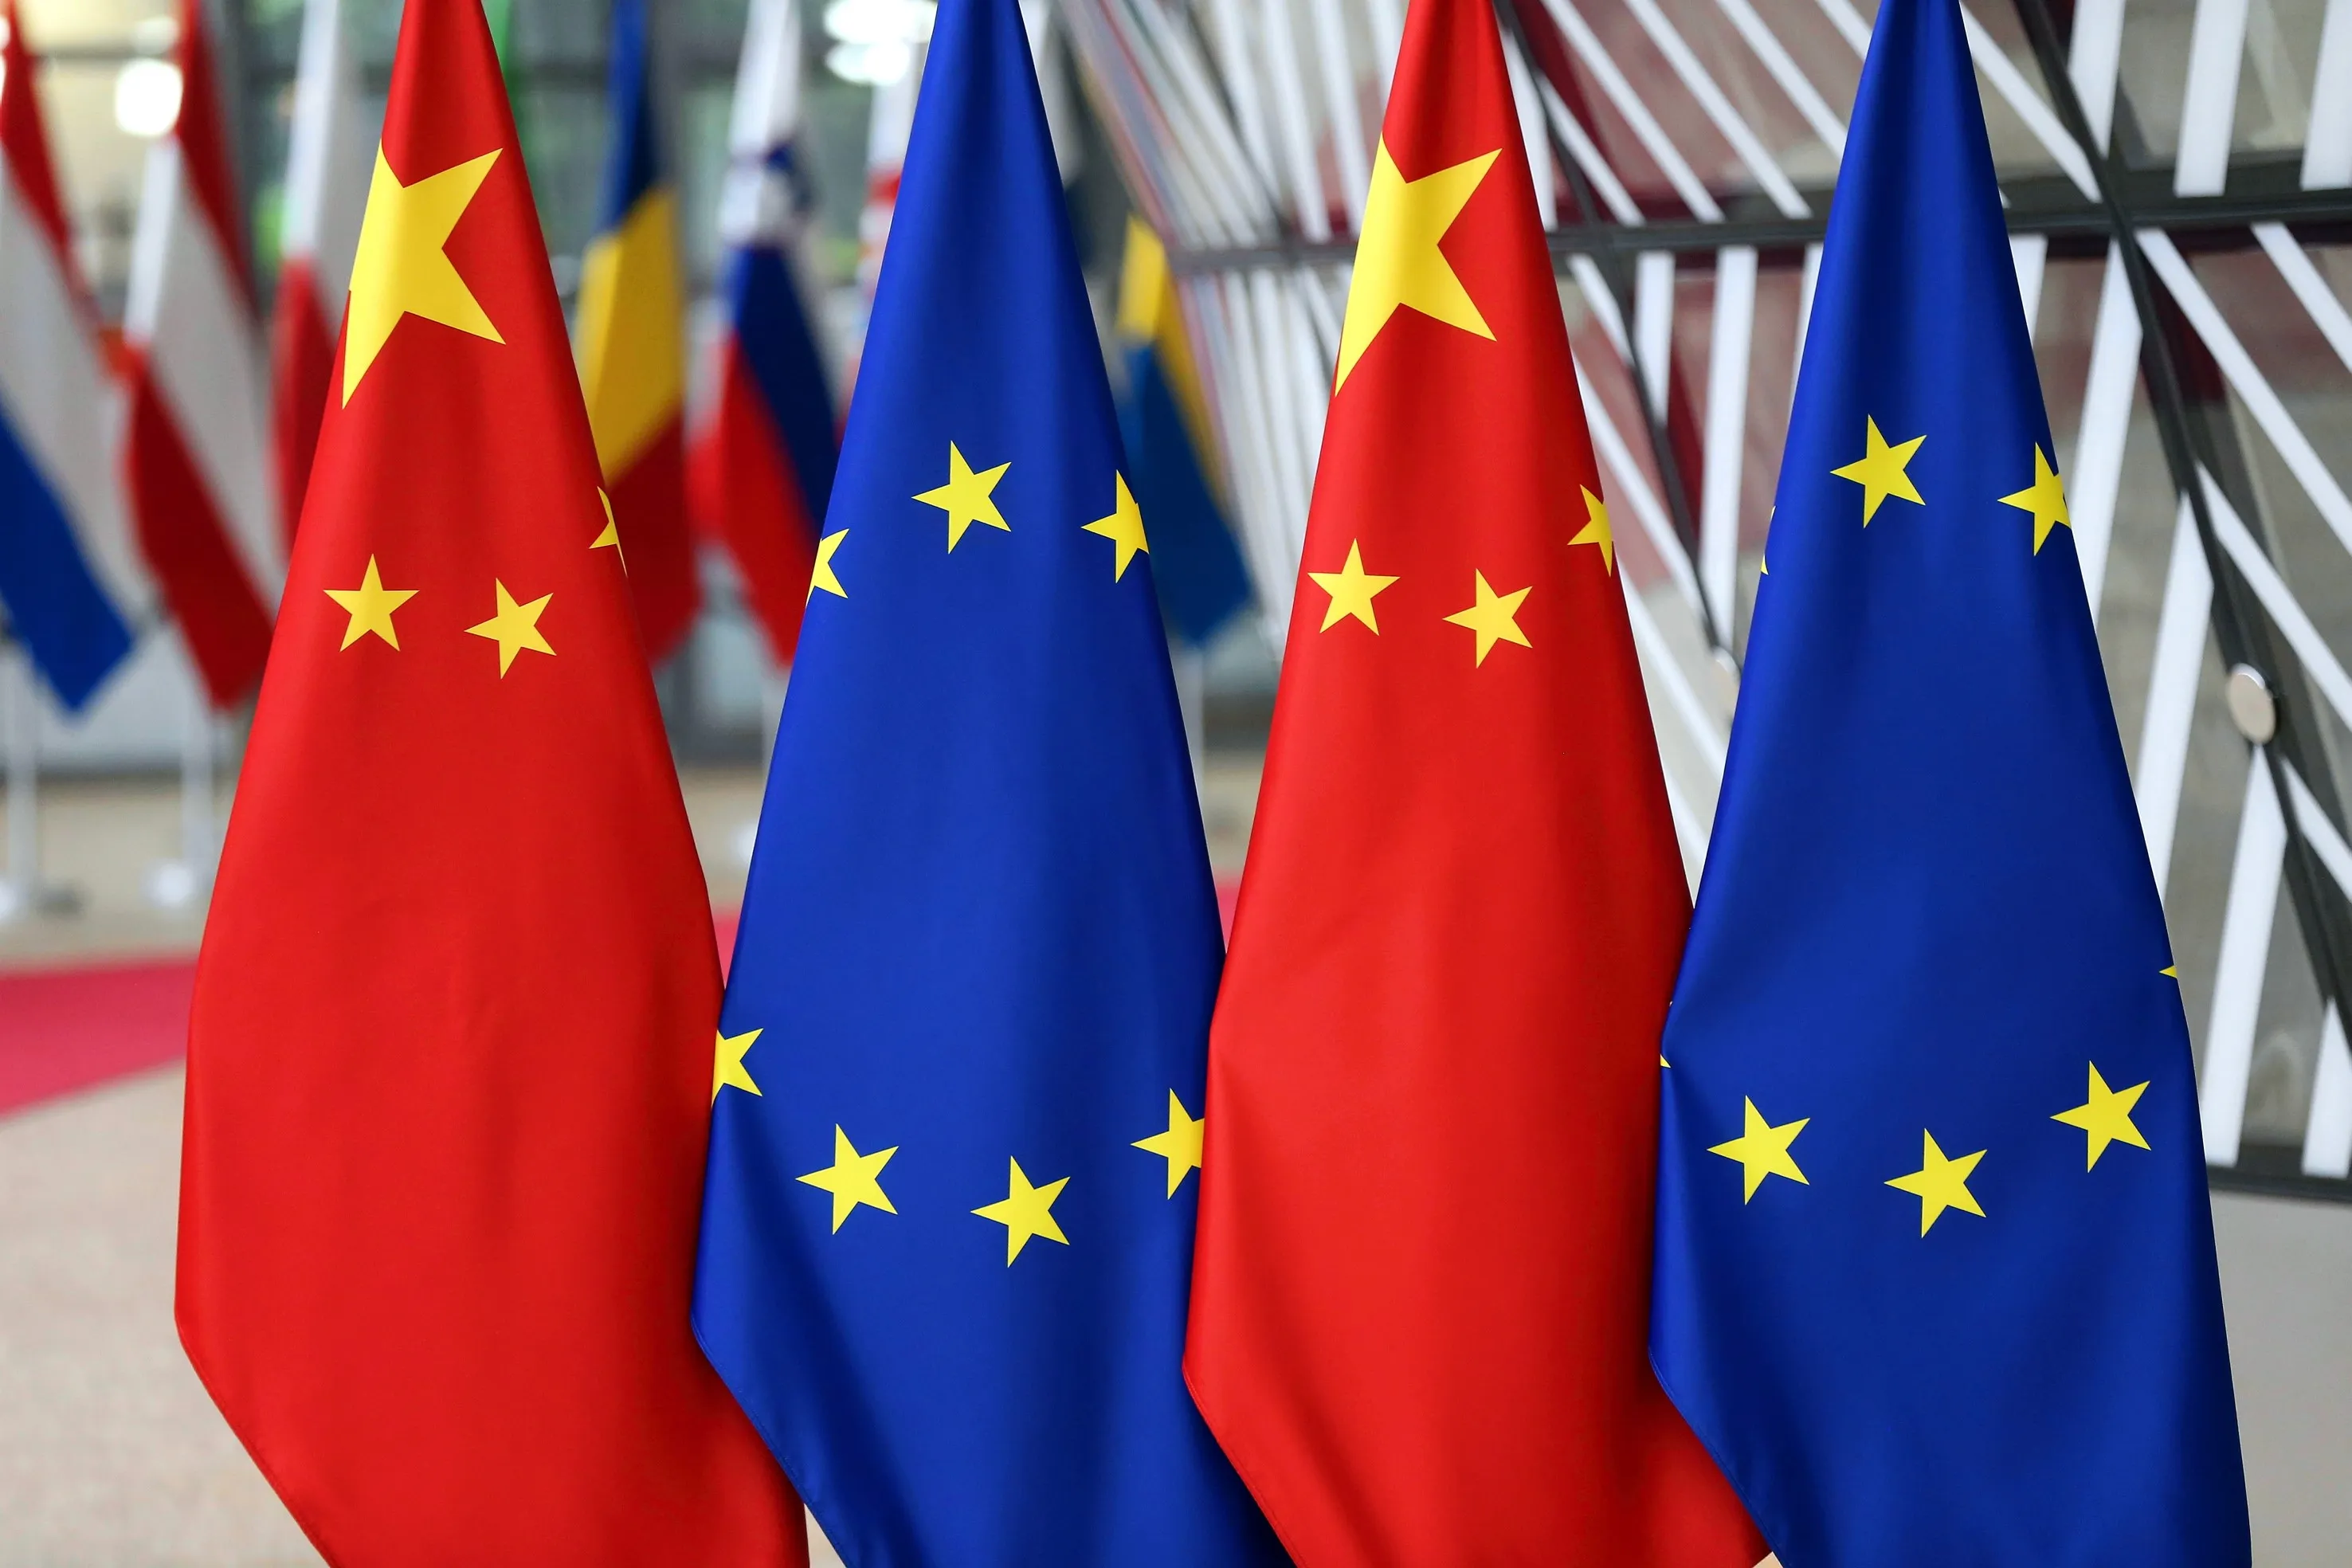 At a glance: 5 factors at play between Europe and Beijing